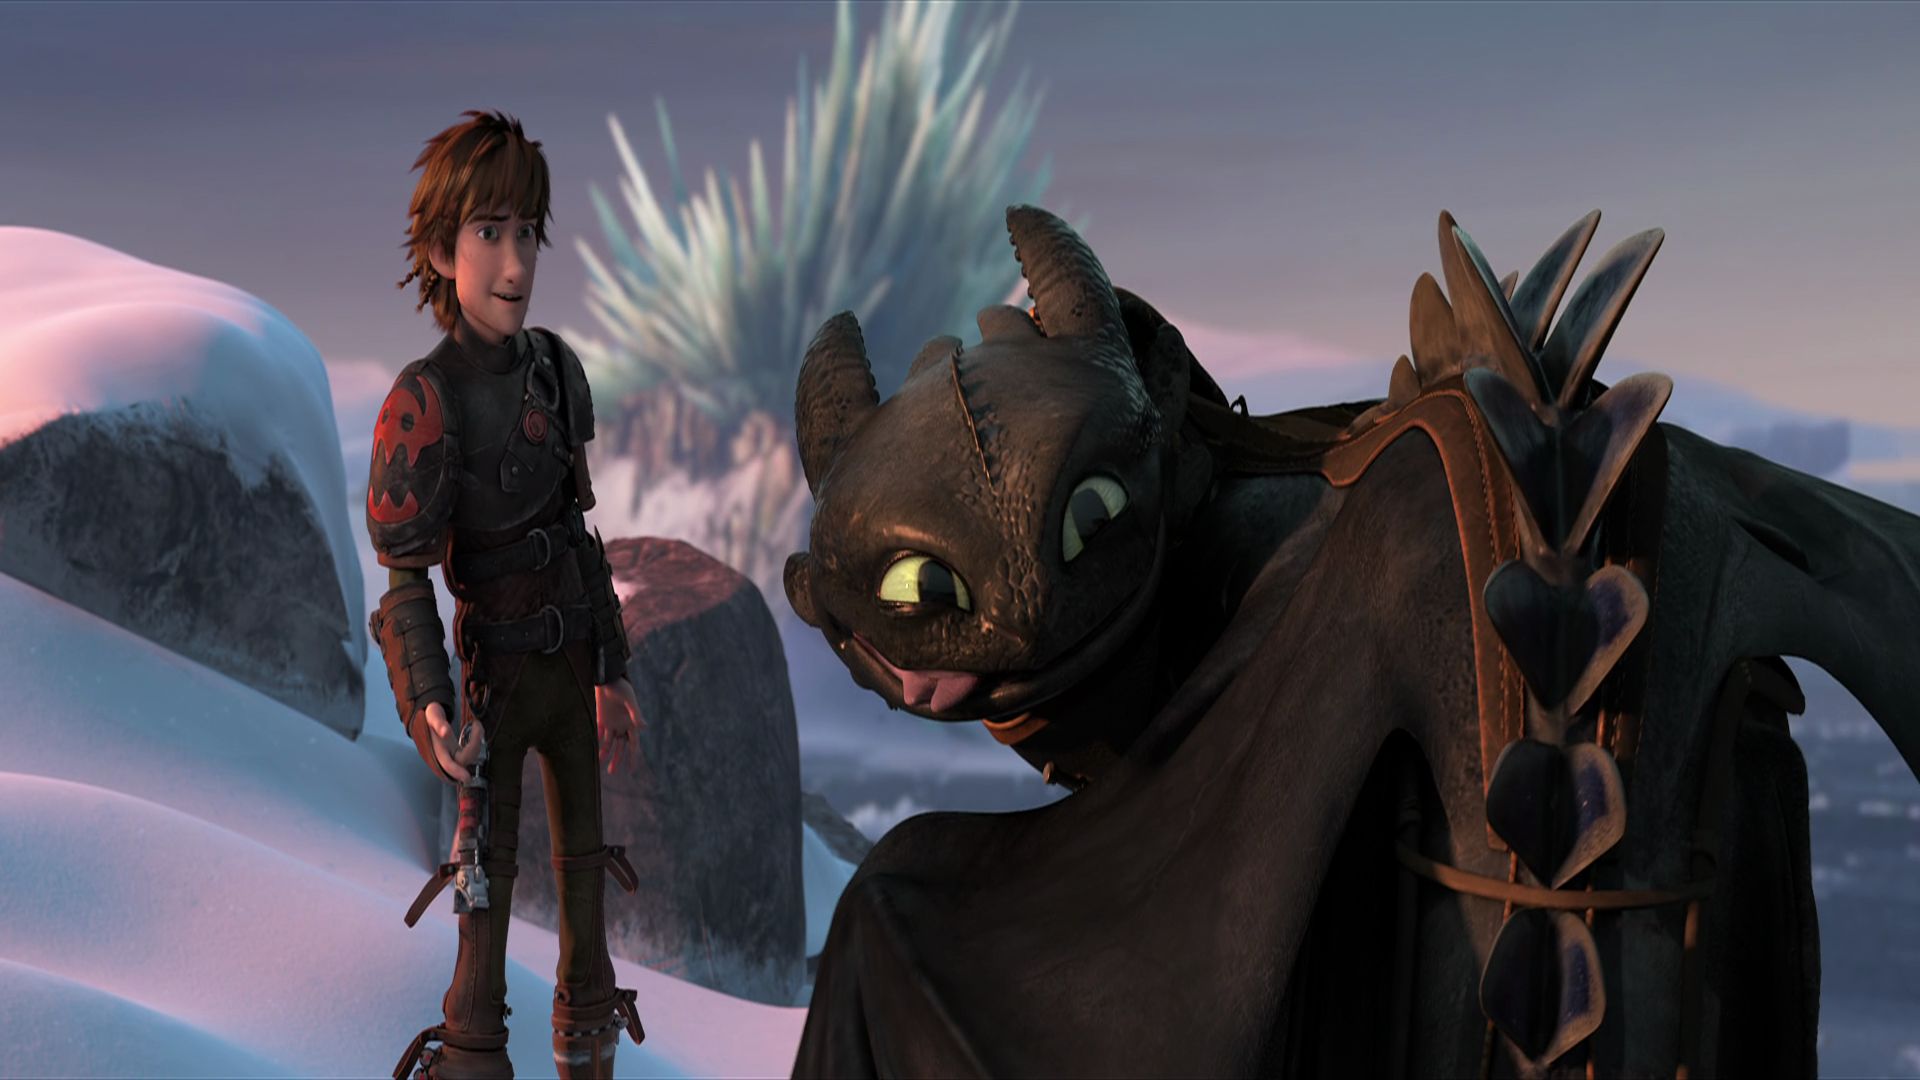 toothless (how to train your dragon), movie, how to train your dragon 2, hiccup (how to train your dragon), how to train your dragon